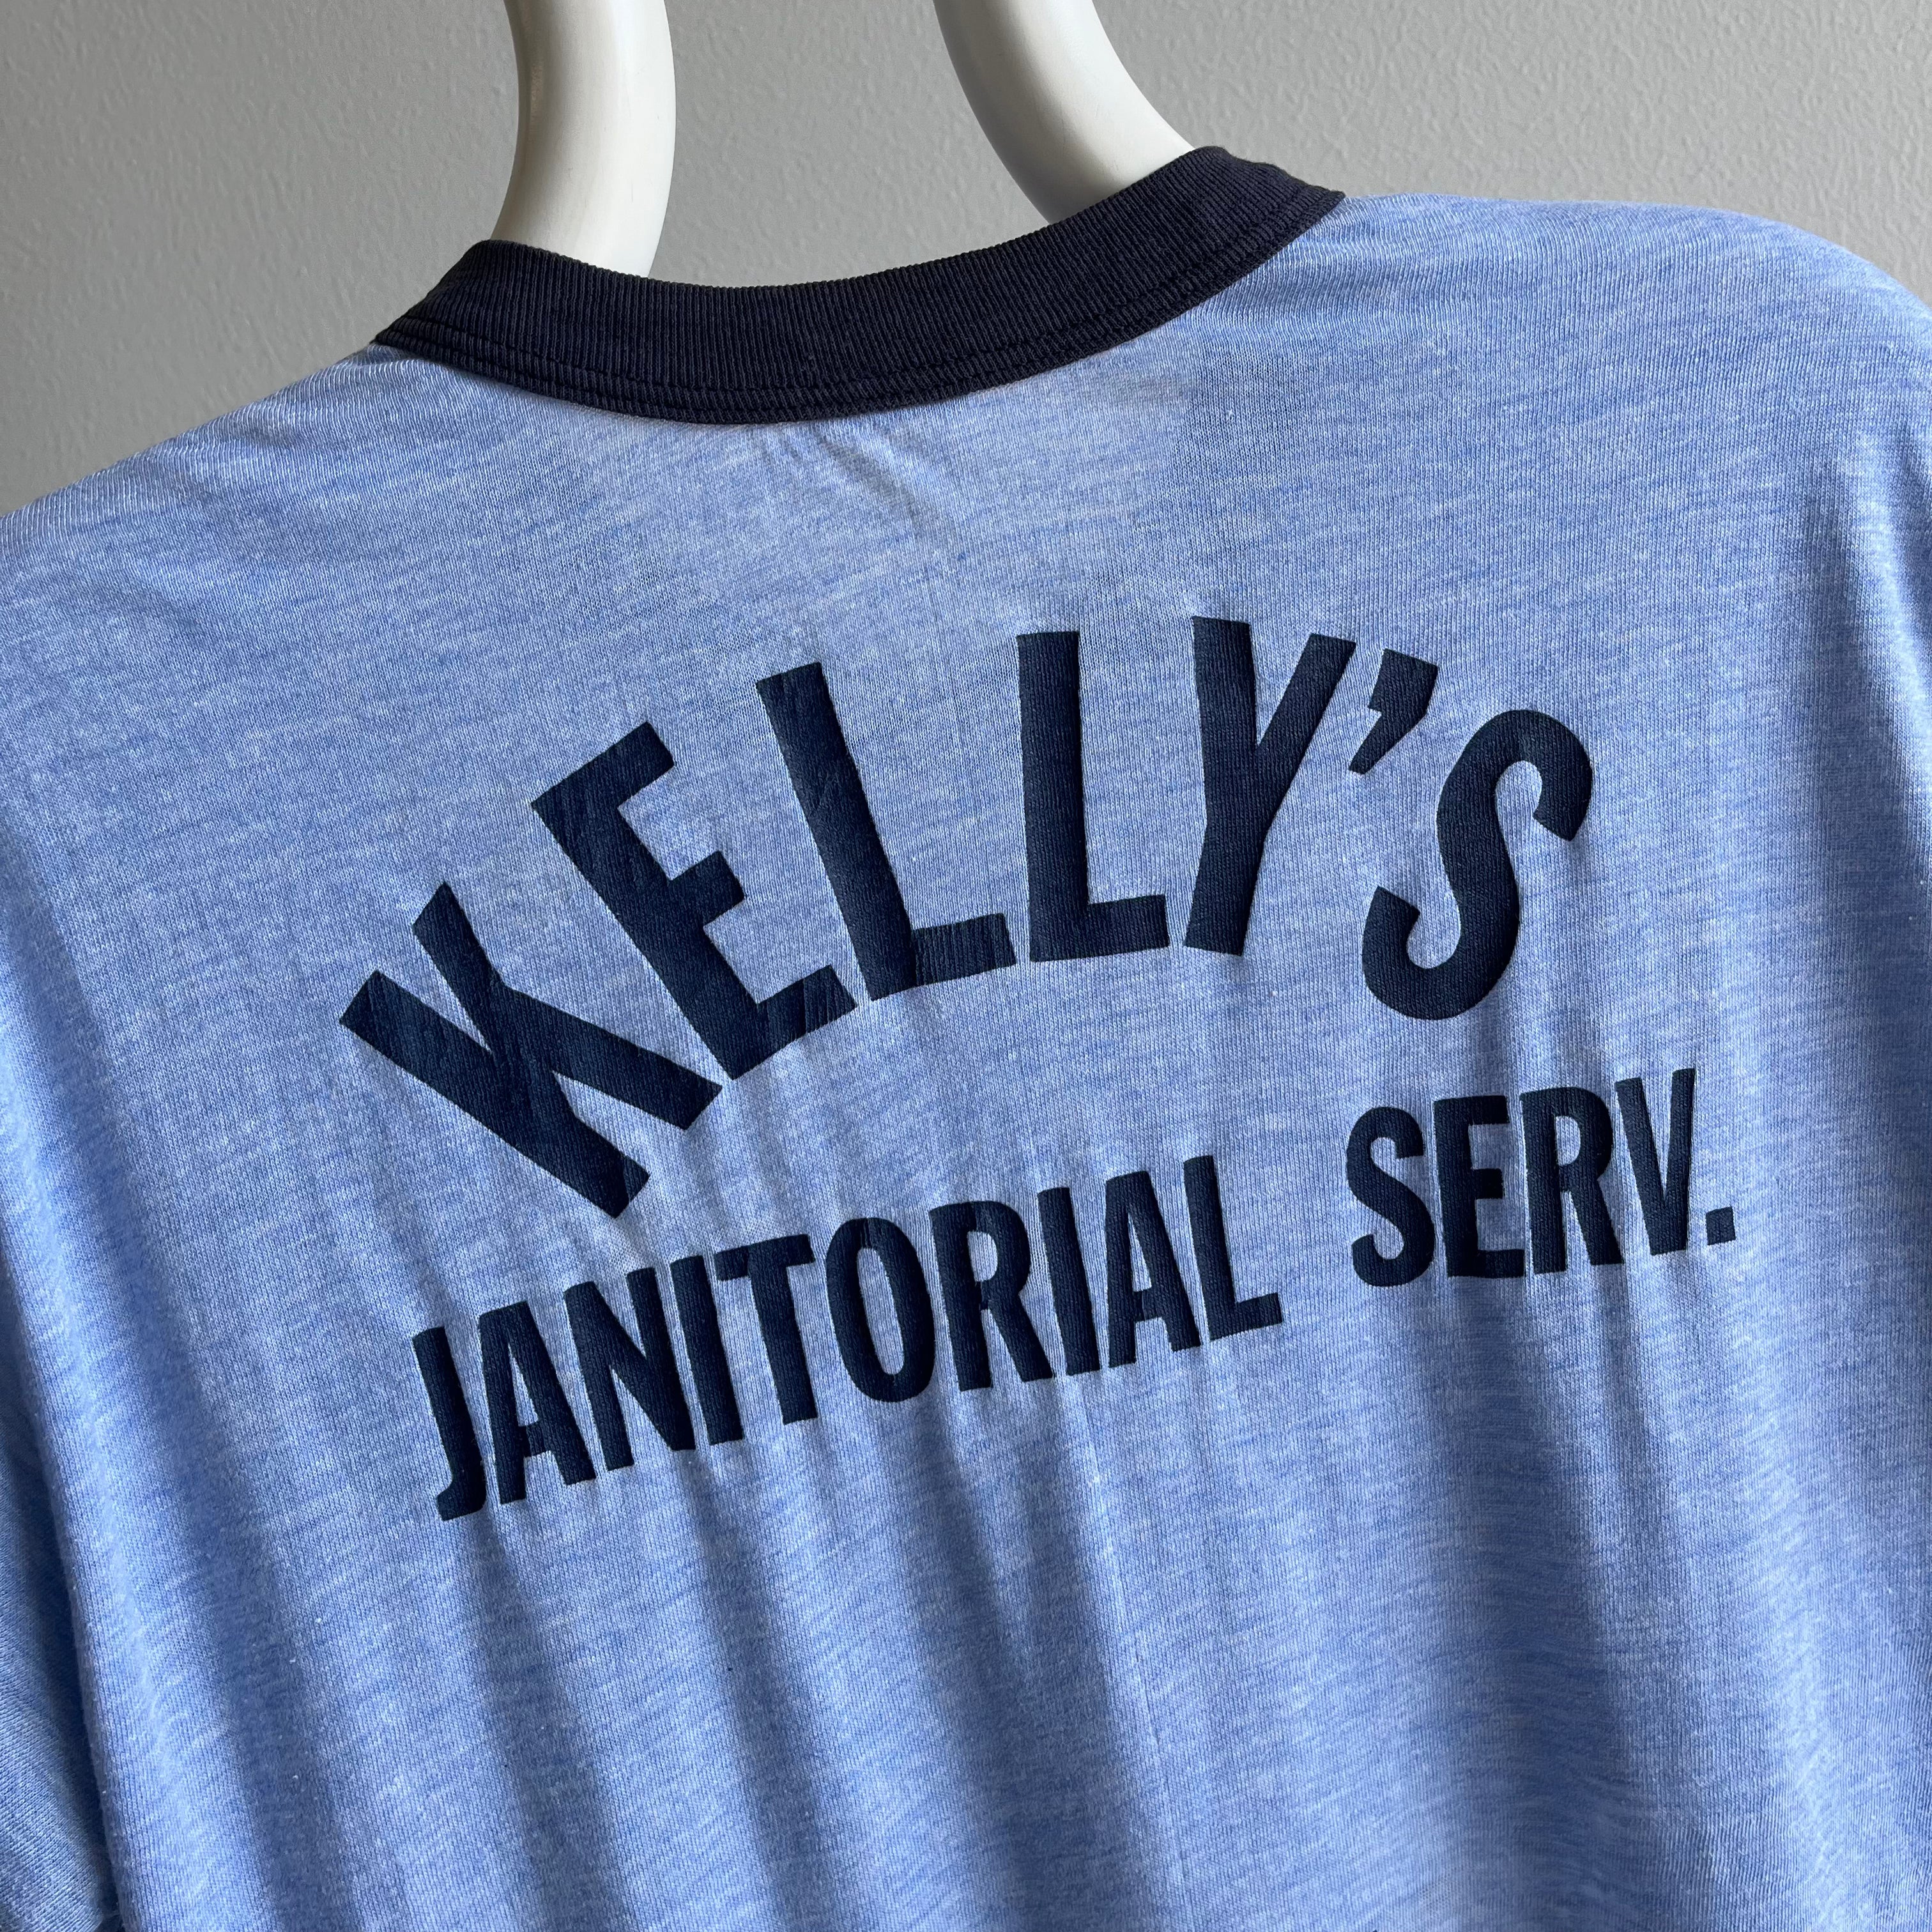 1970s Kelly's Janitorial Serv. Bleach Stained Ring T-Shirt